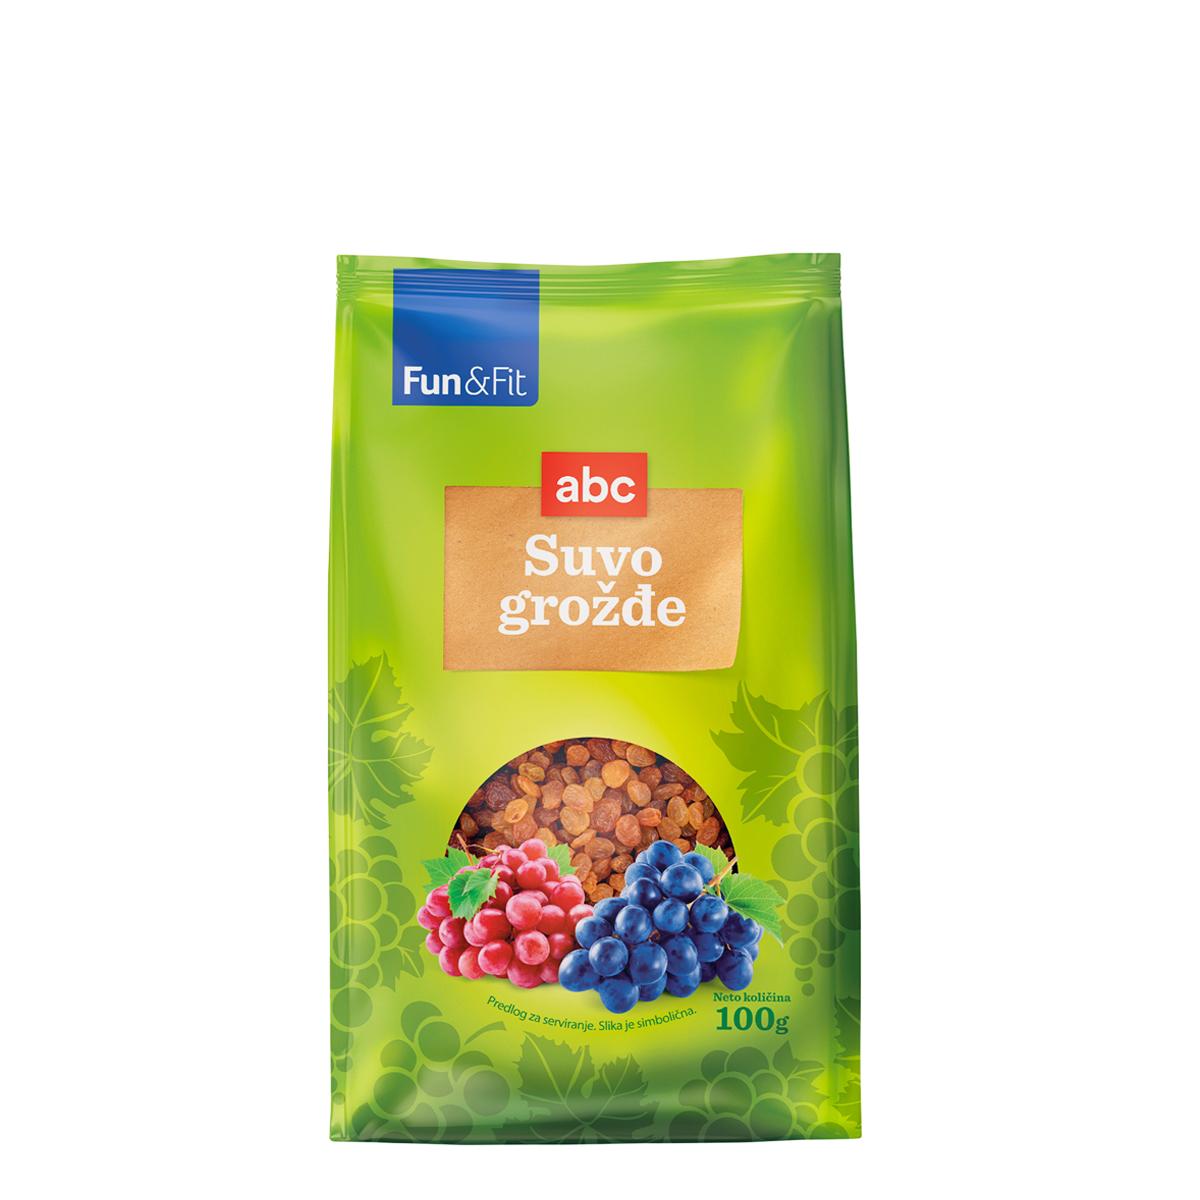 Selected image for ABC Suvo grožđe 100 g